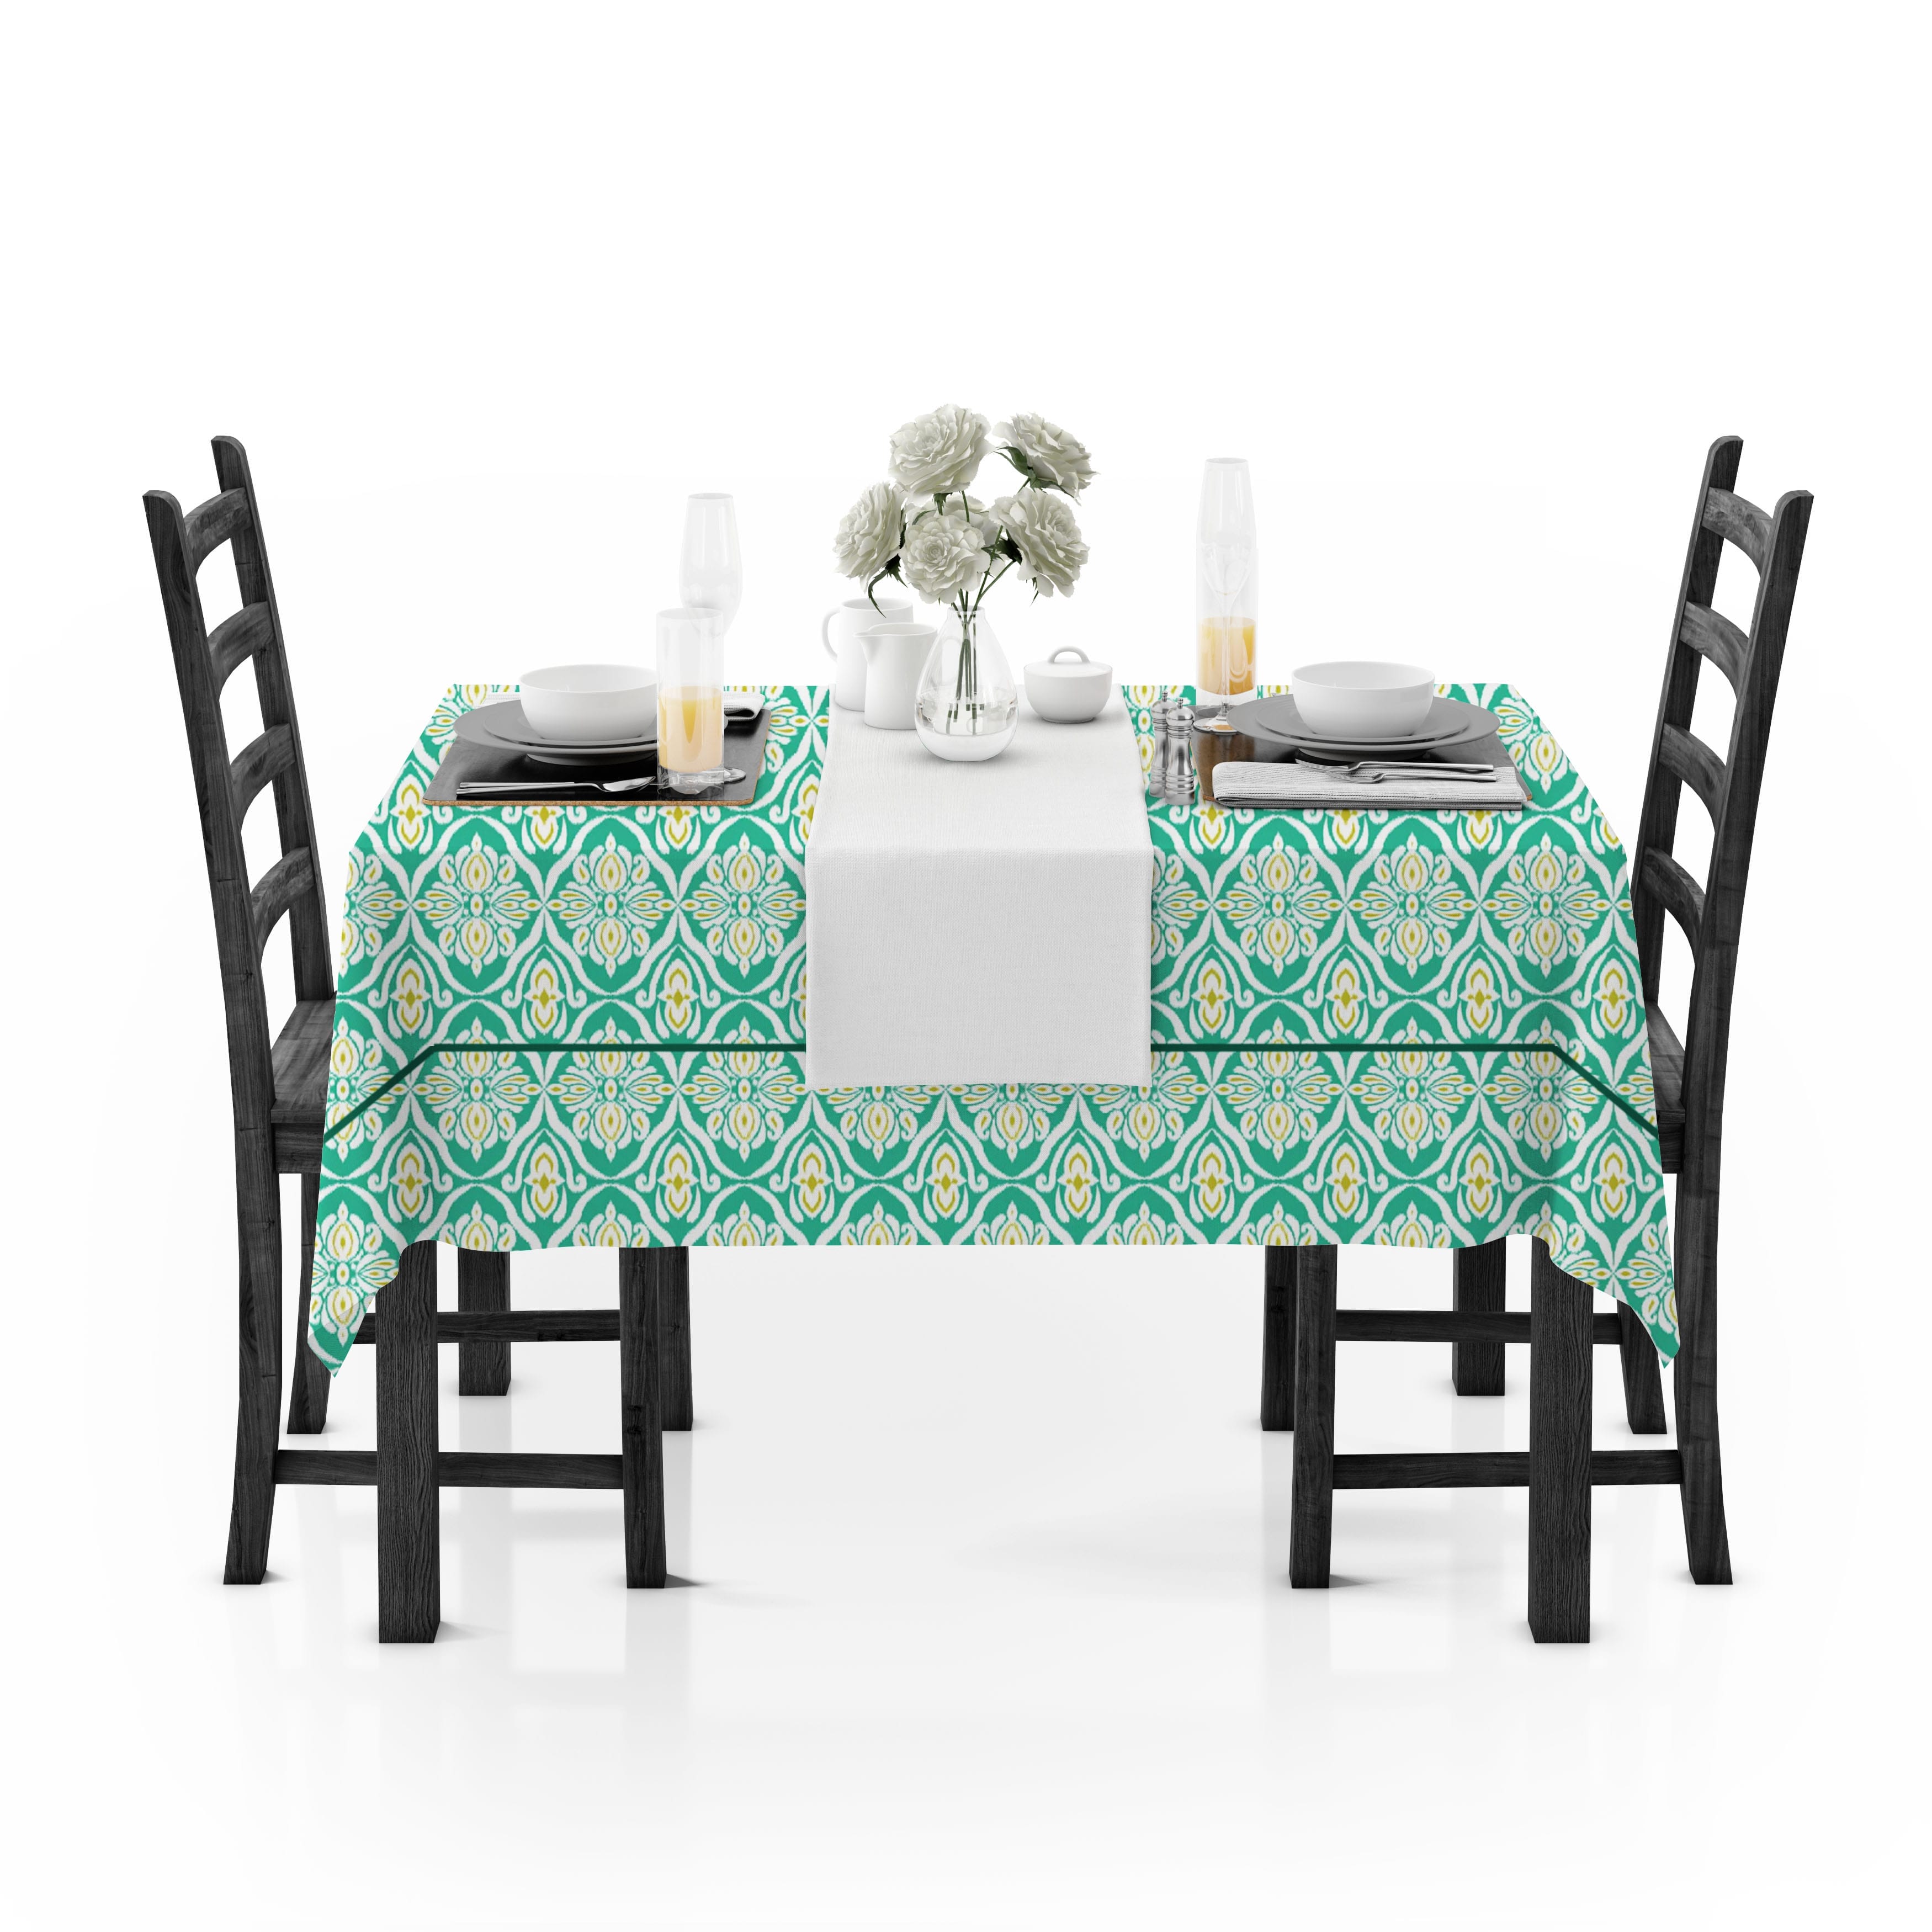 Prism Aqua Printed Cotton Damask Table Cover(1 Pc) online in India